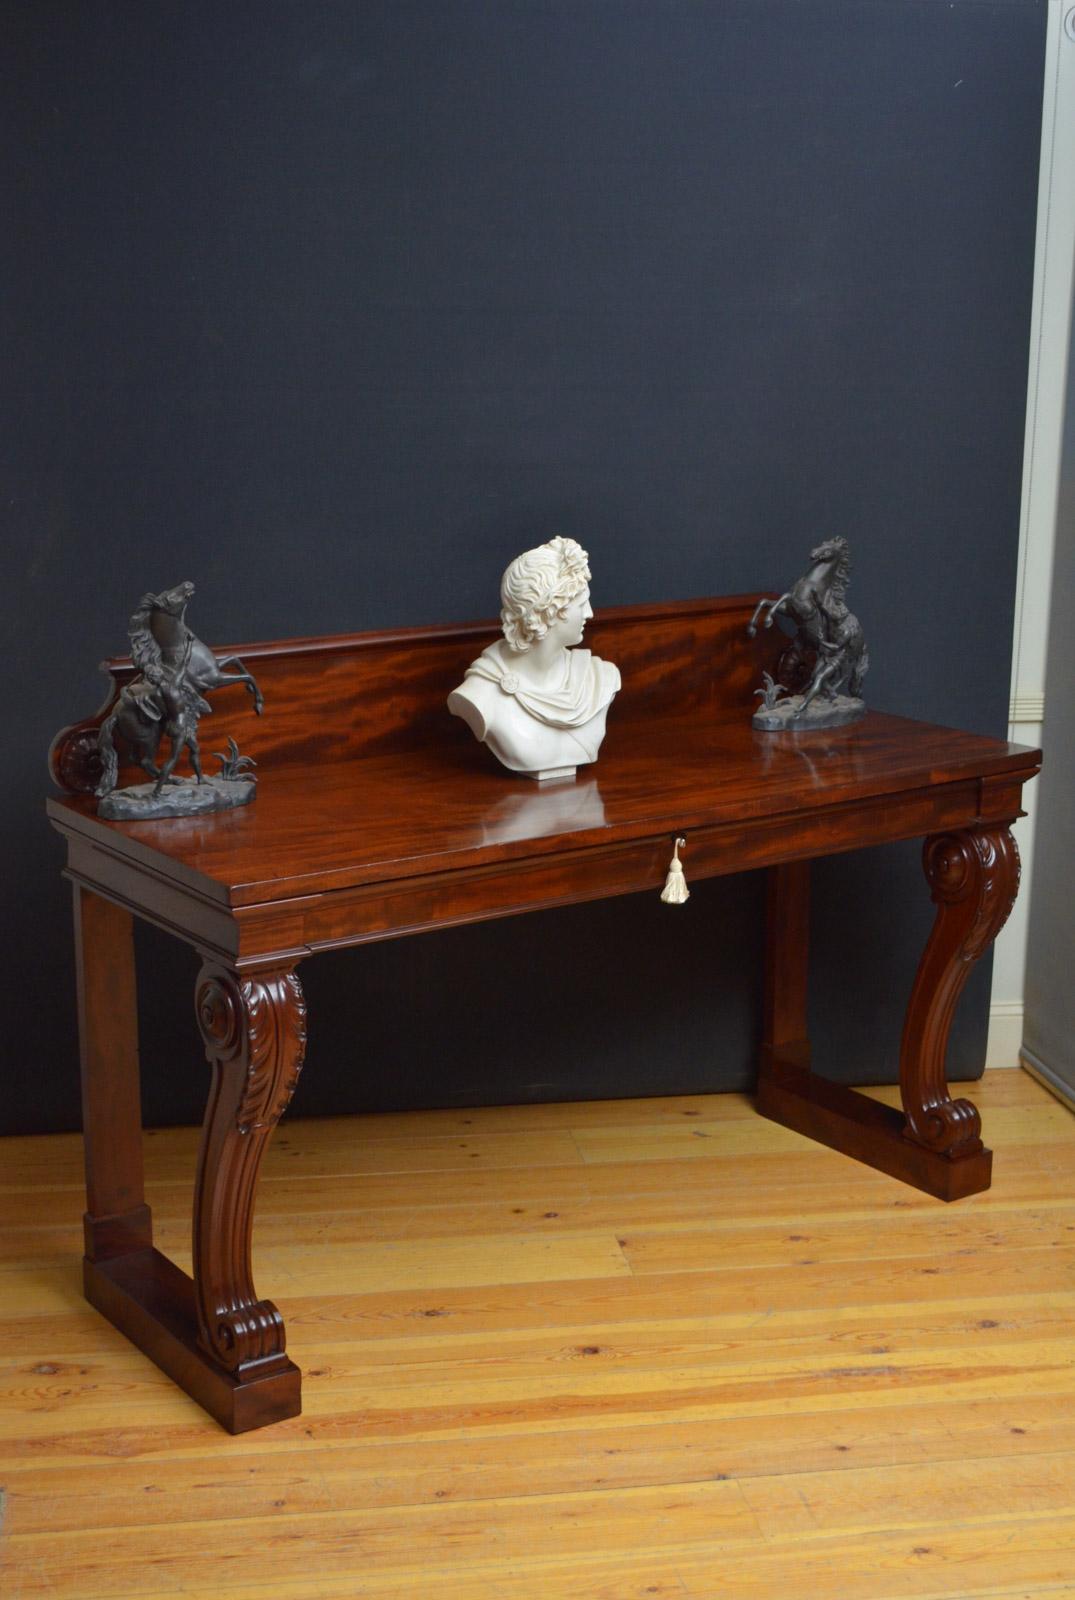 Sn4560 fine quality William IV, mahogany hall table, having figured mahogany upstand with carved pateras and stunning figured mahogany top above a molded drawer (key for decoration purposes only), all raised on beautifully carved legs terminating in